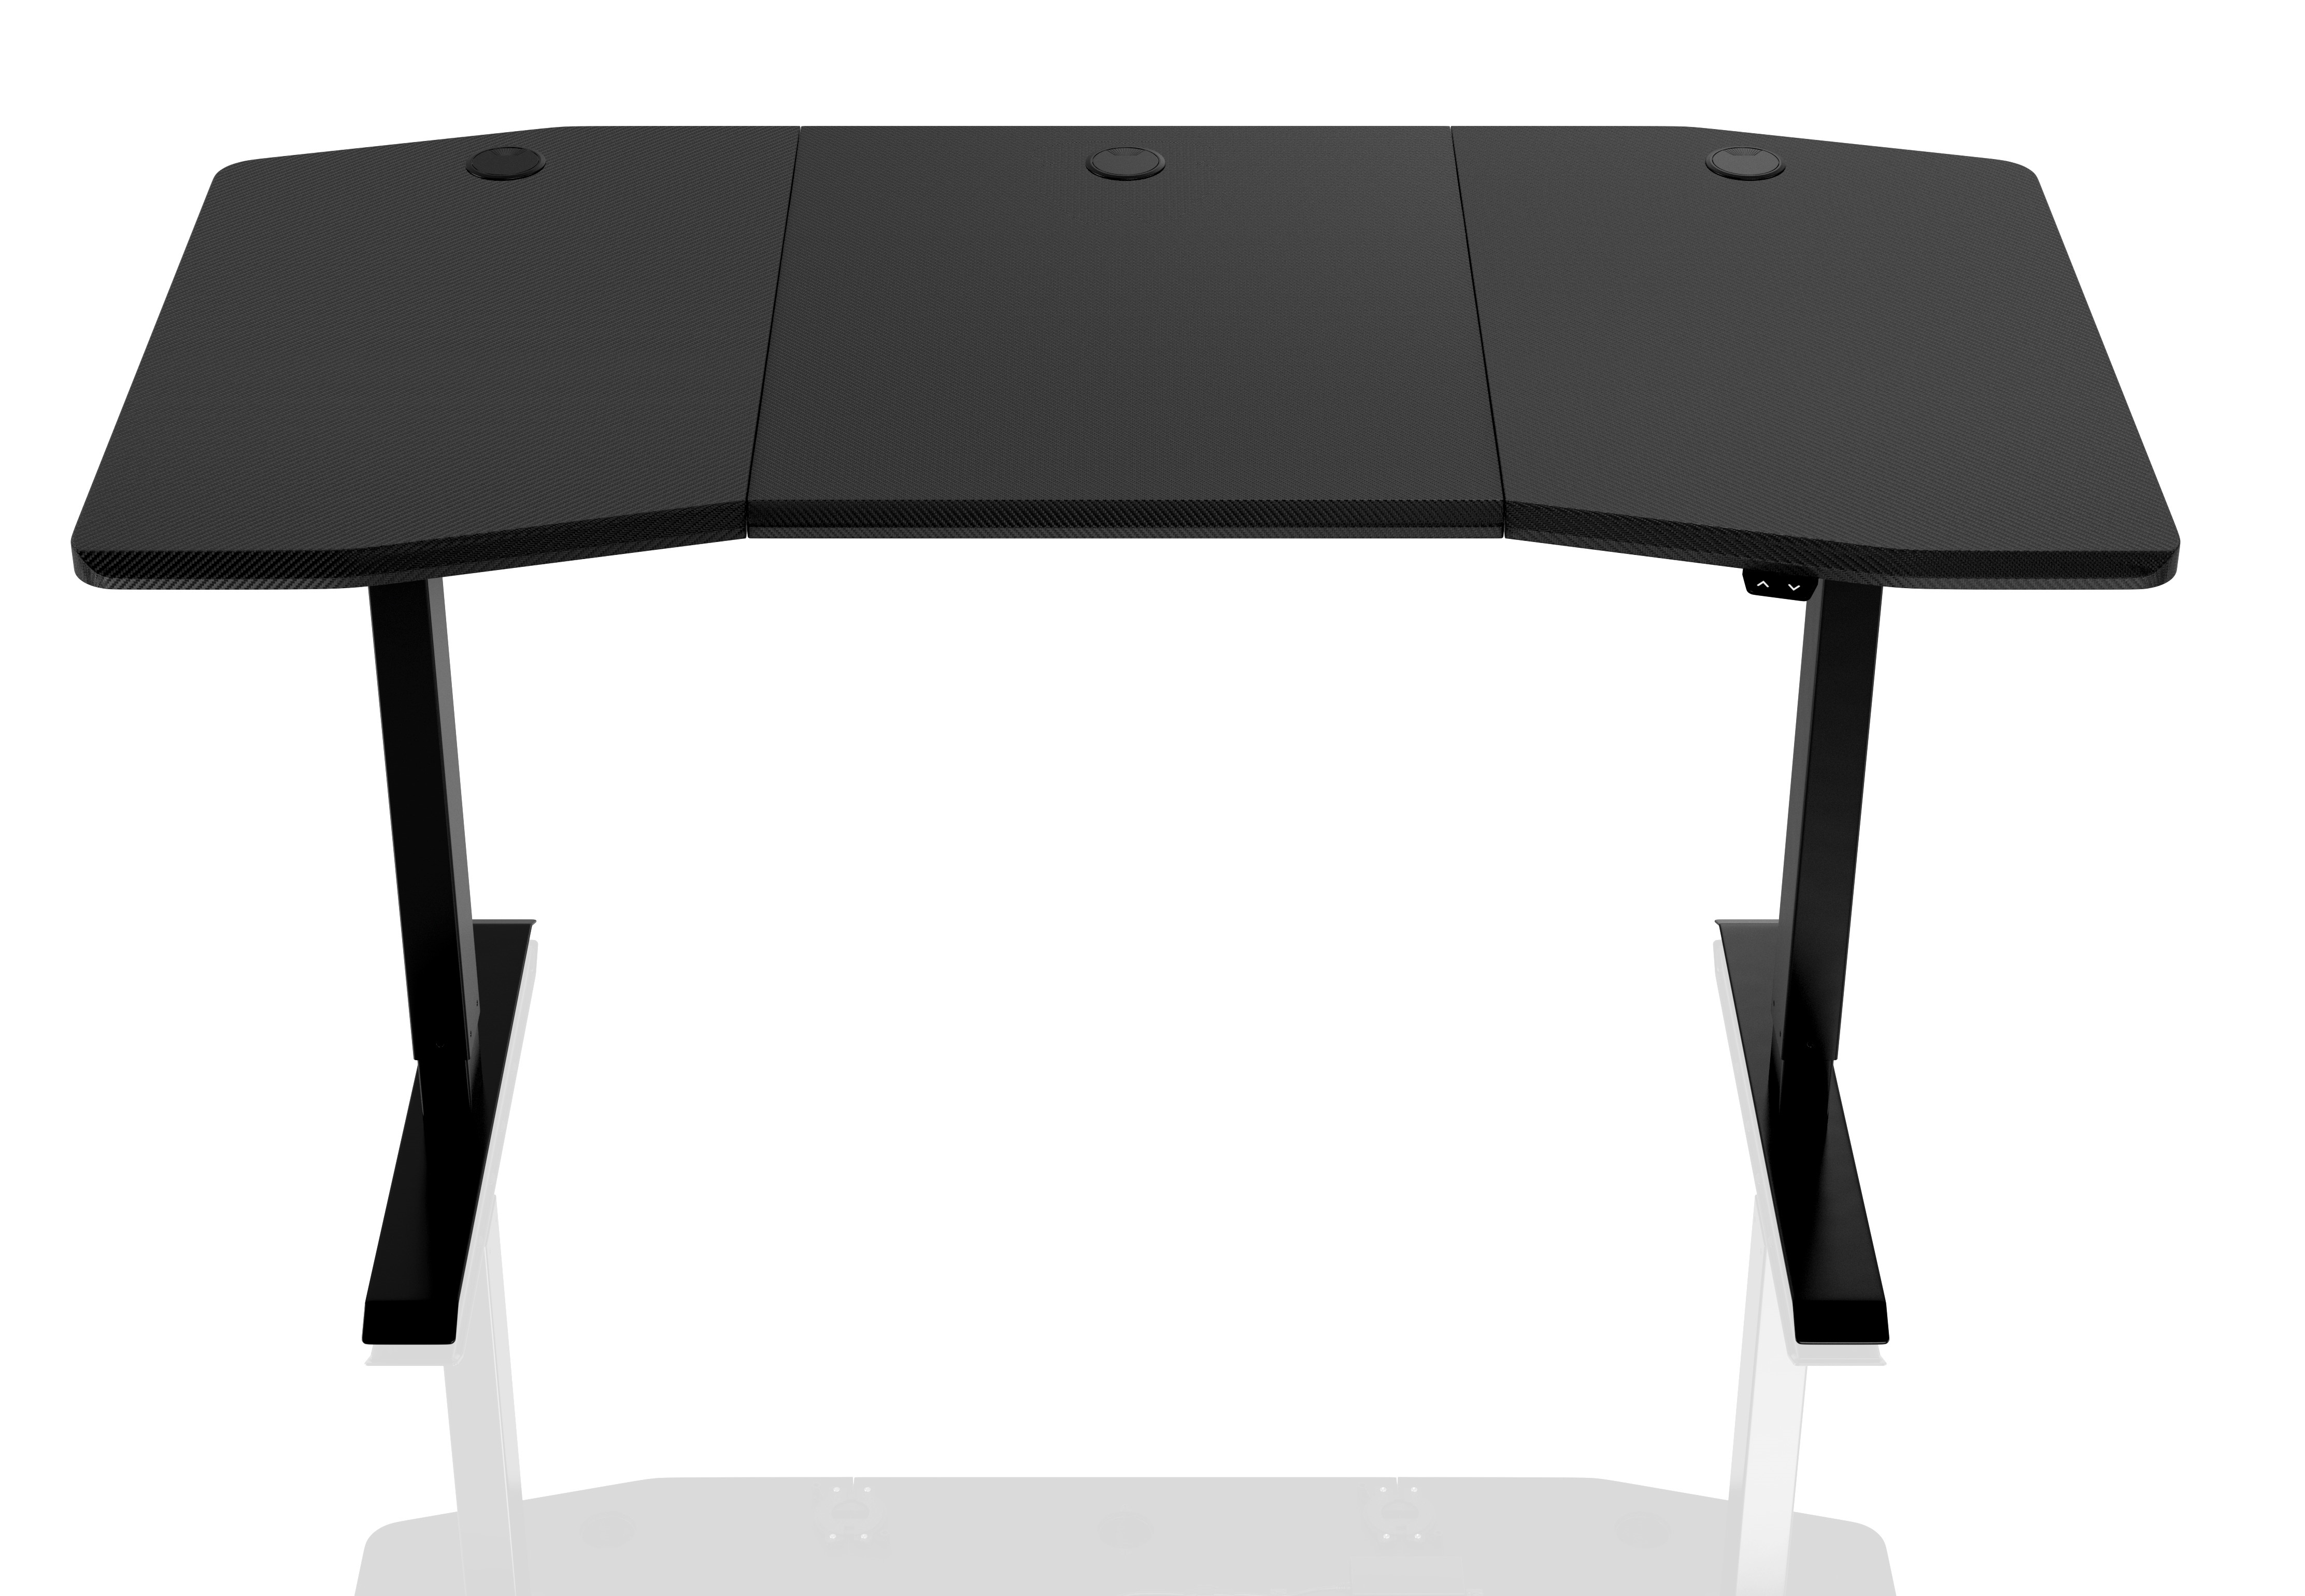 Nitro Concepts - Nitro Concepts D16E Electric Adjustable Sit/Stand Gaming Desk - Carbon Red